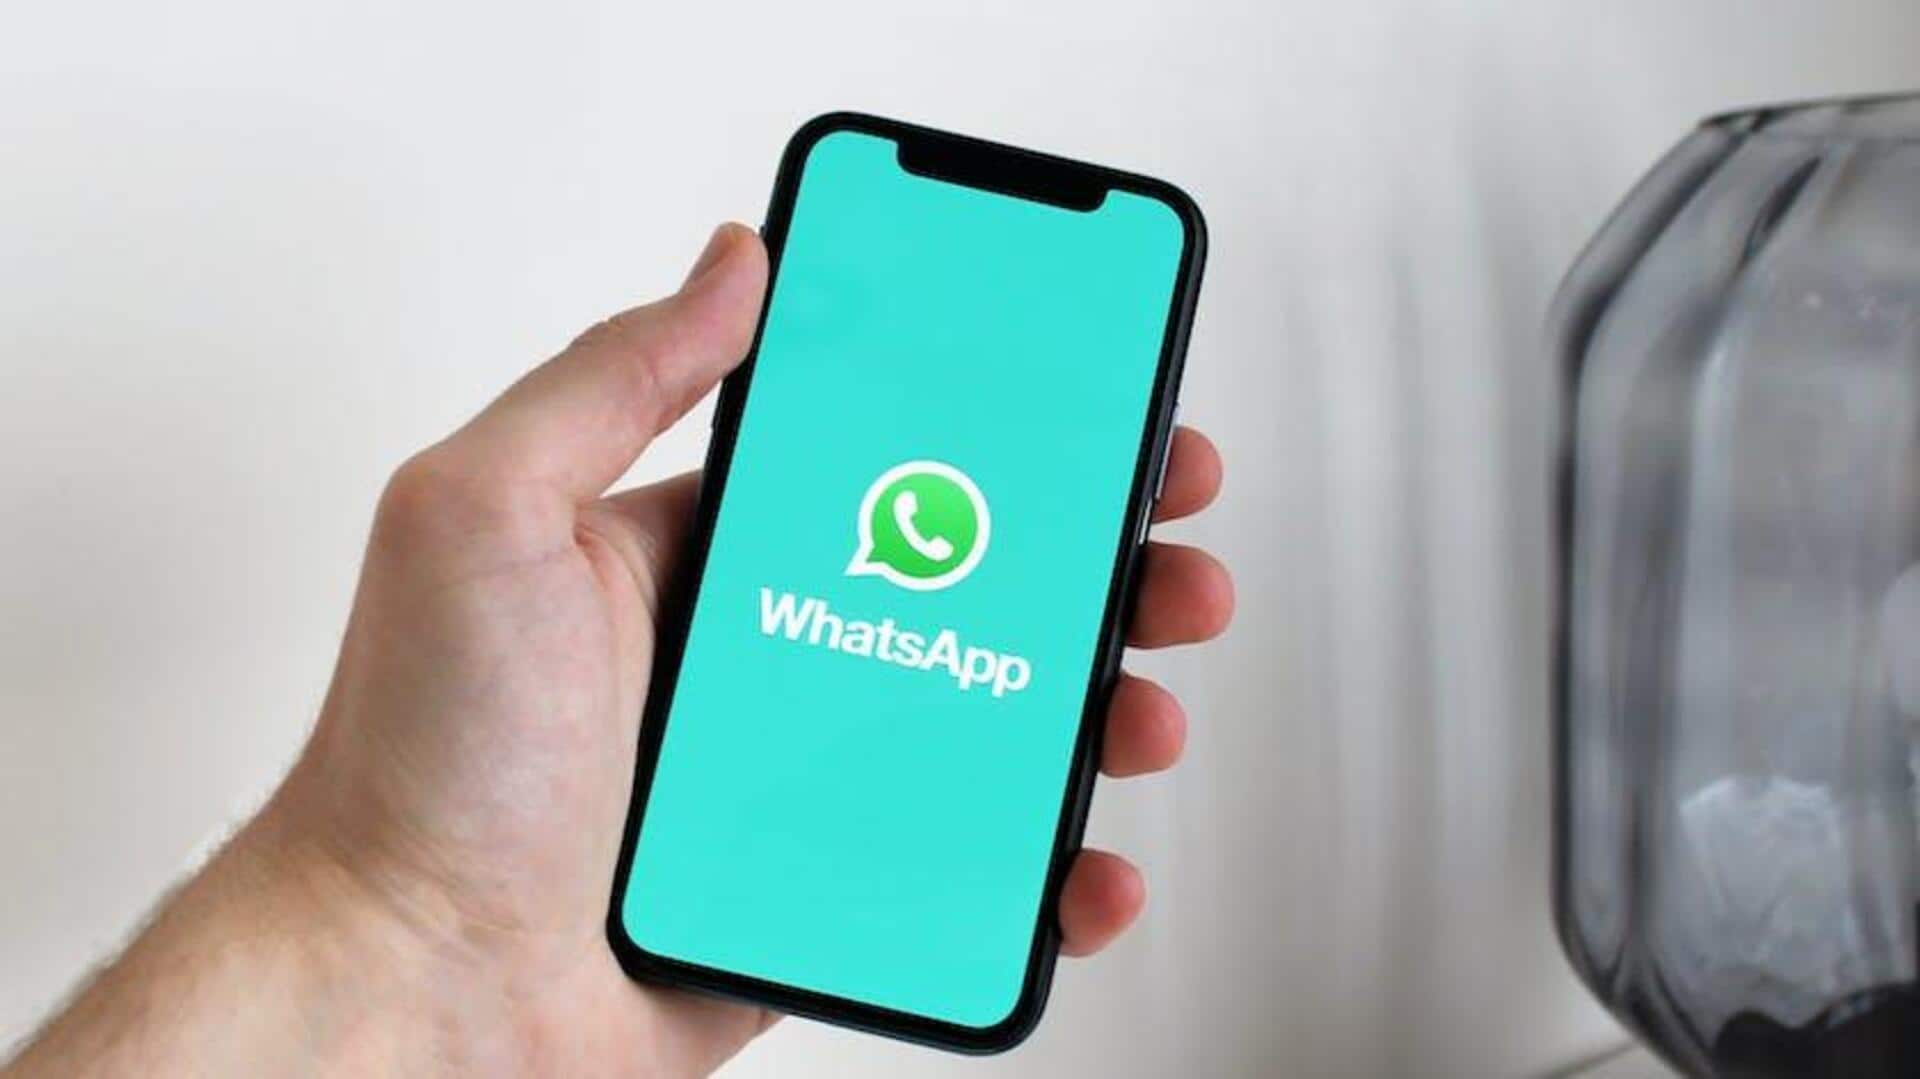 WhatsApp is developing favorite contacts feature for iOS users